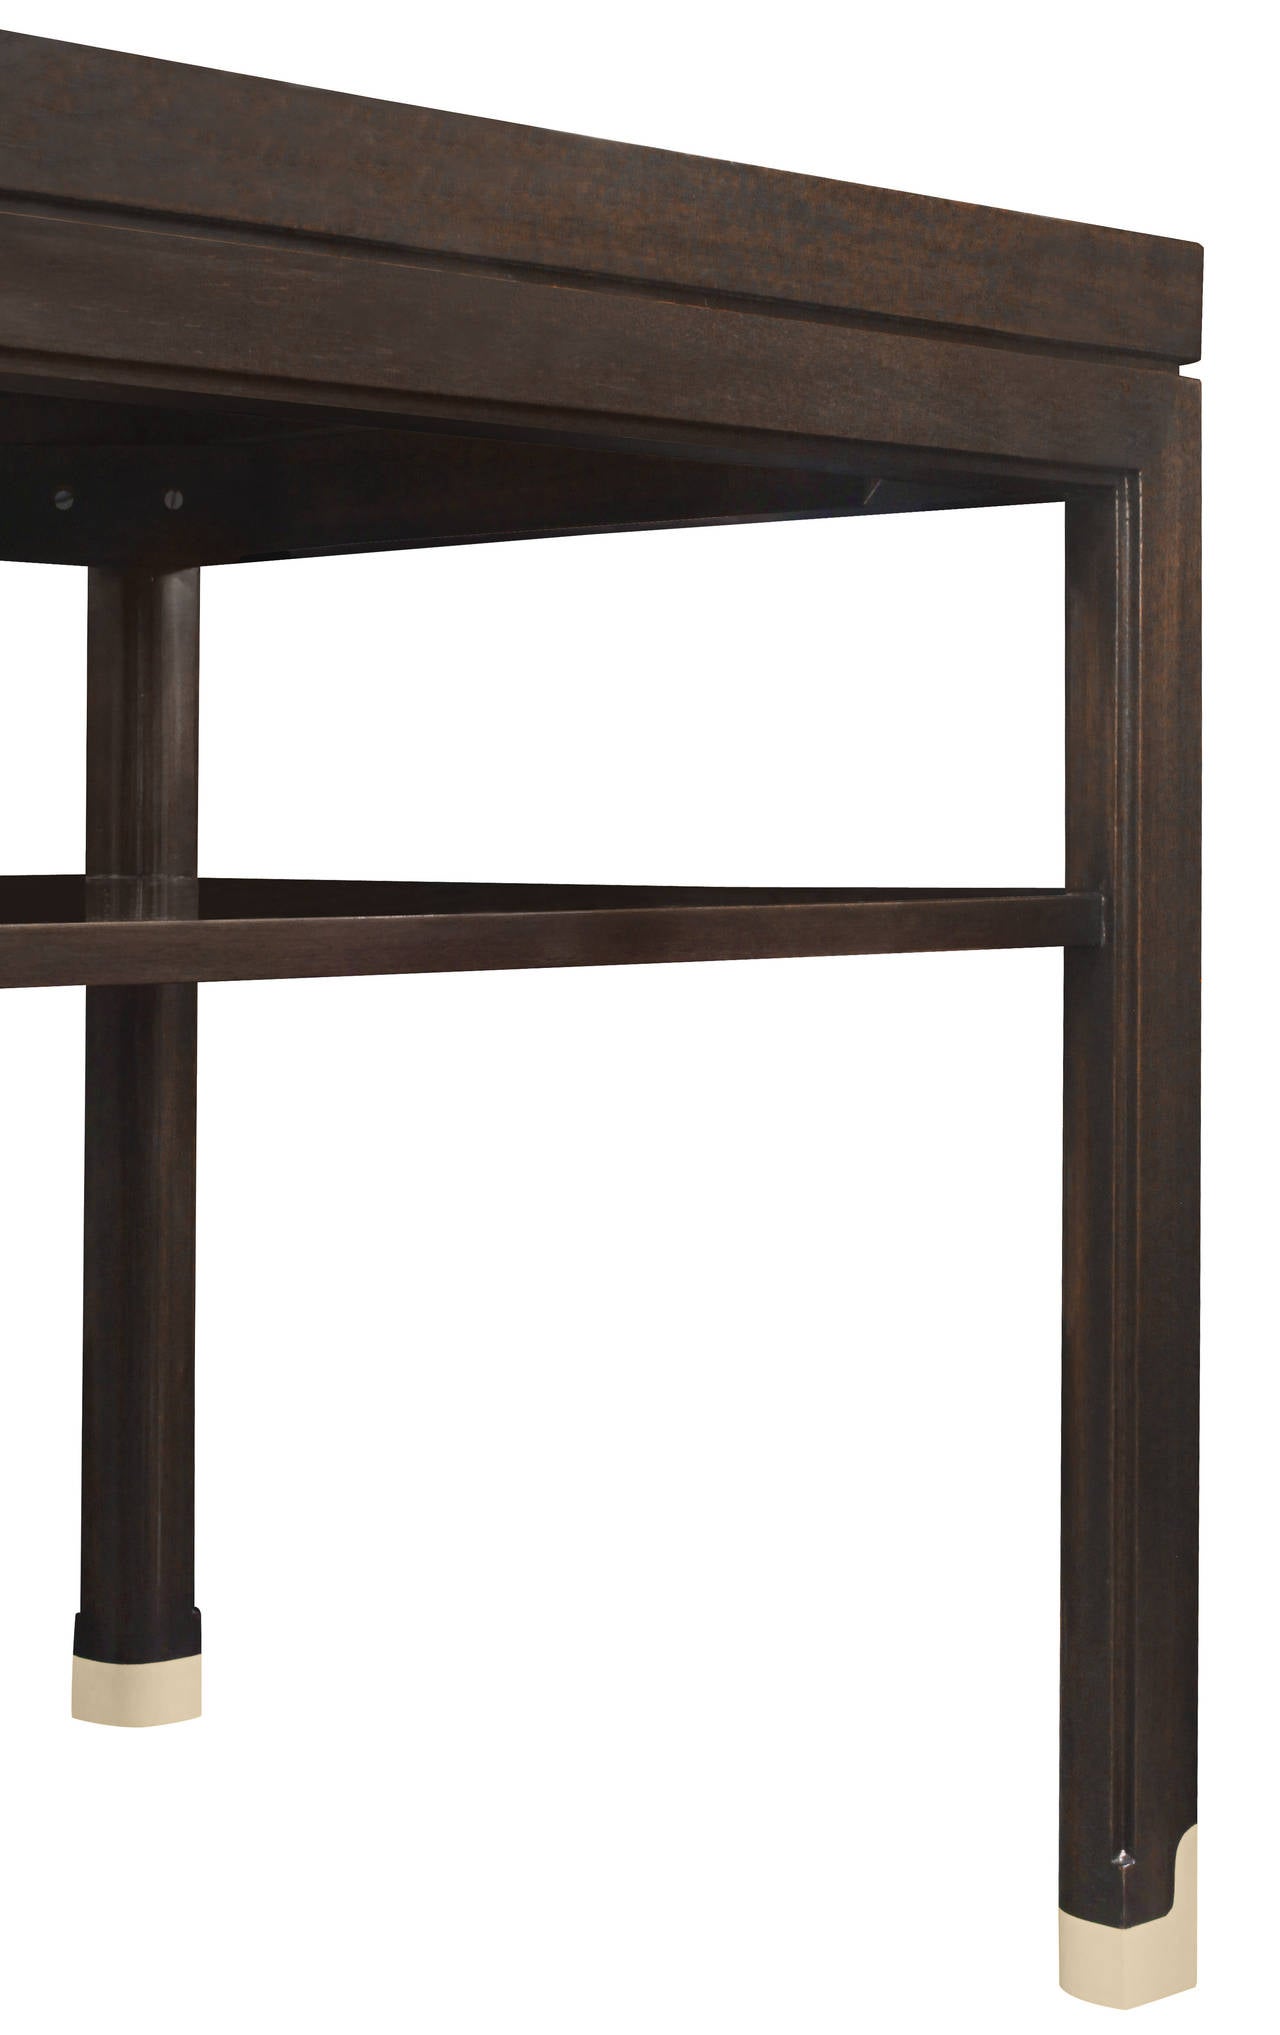 Hand-Crafted Long Console Table in Mahogany by Tommi Parzinger 1960s For Sale